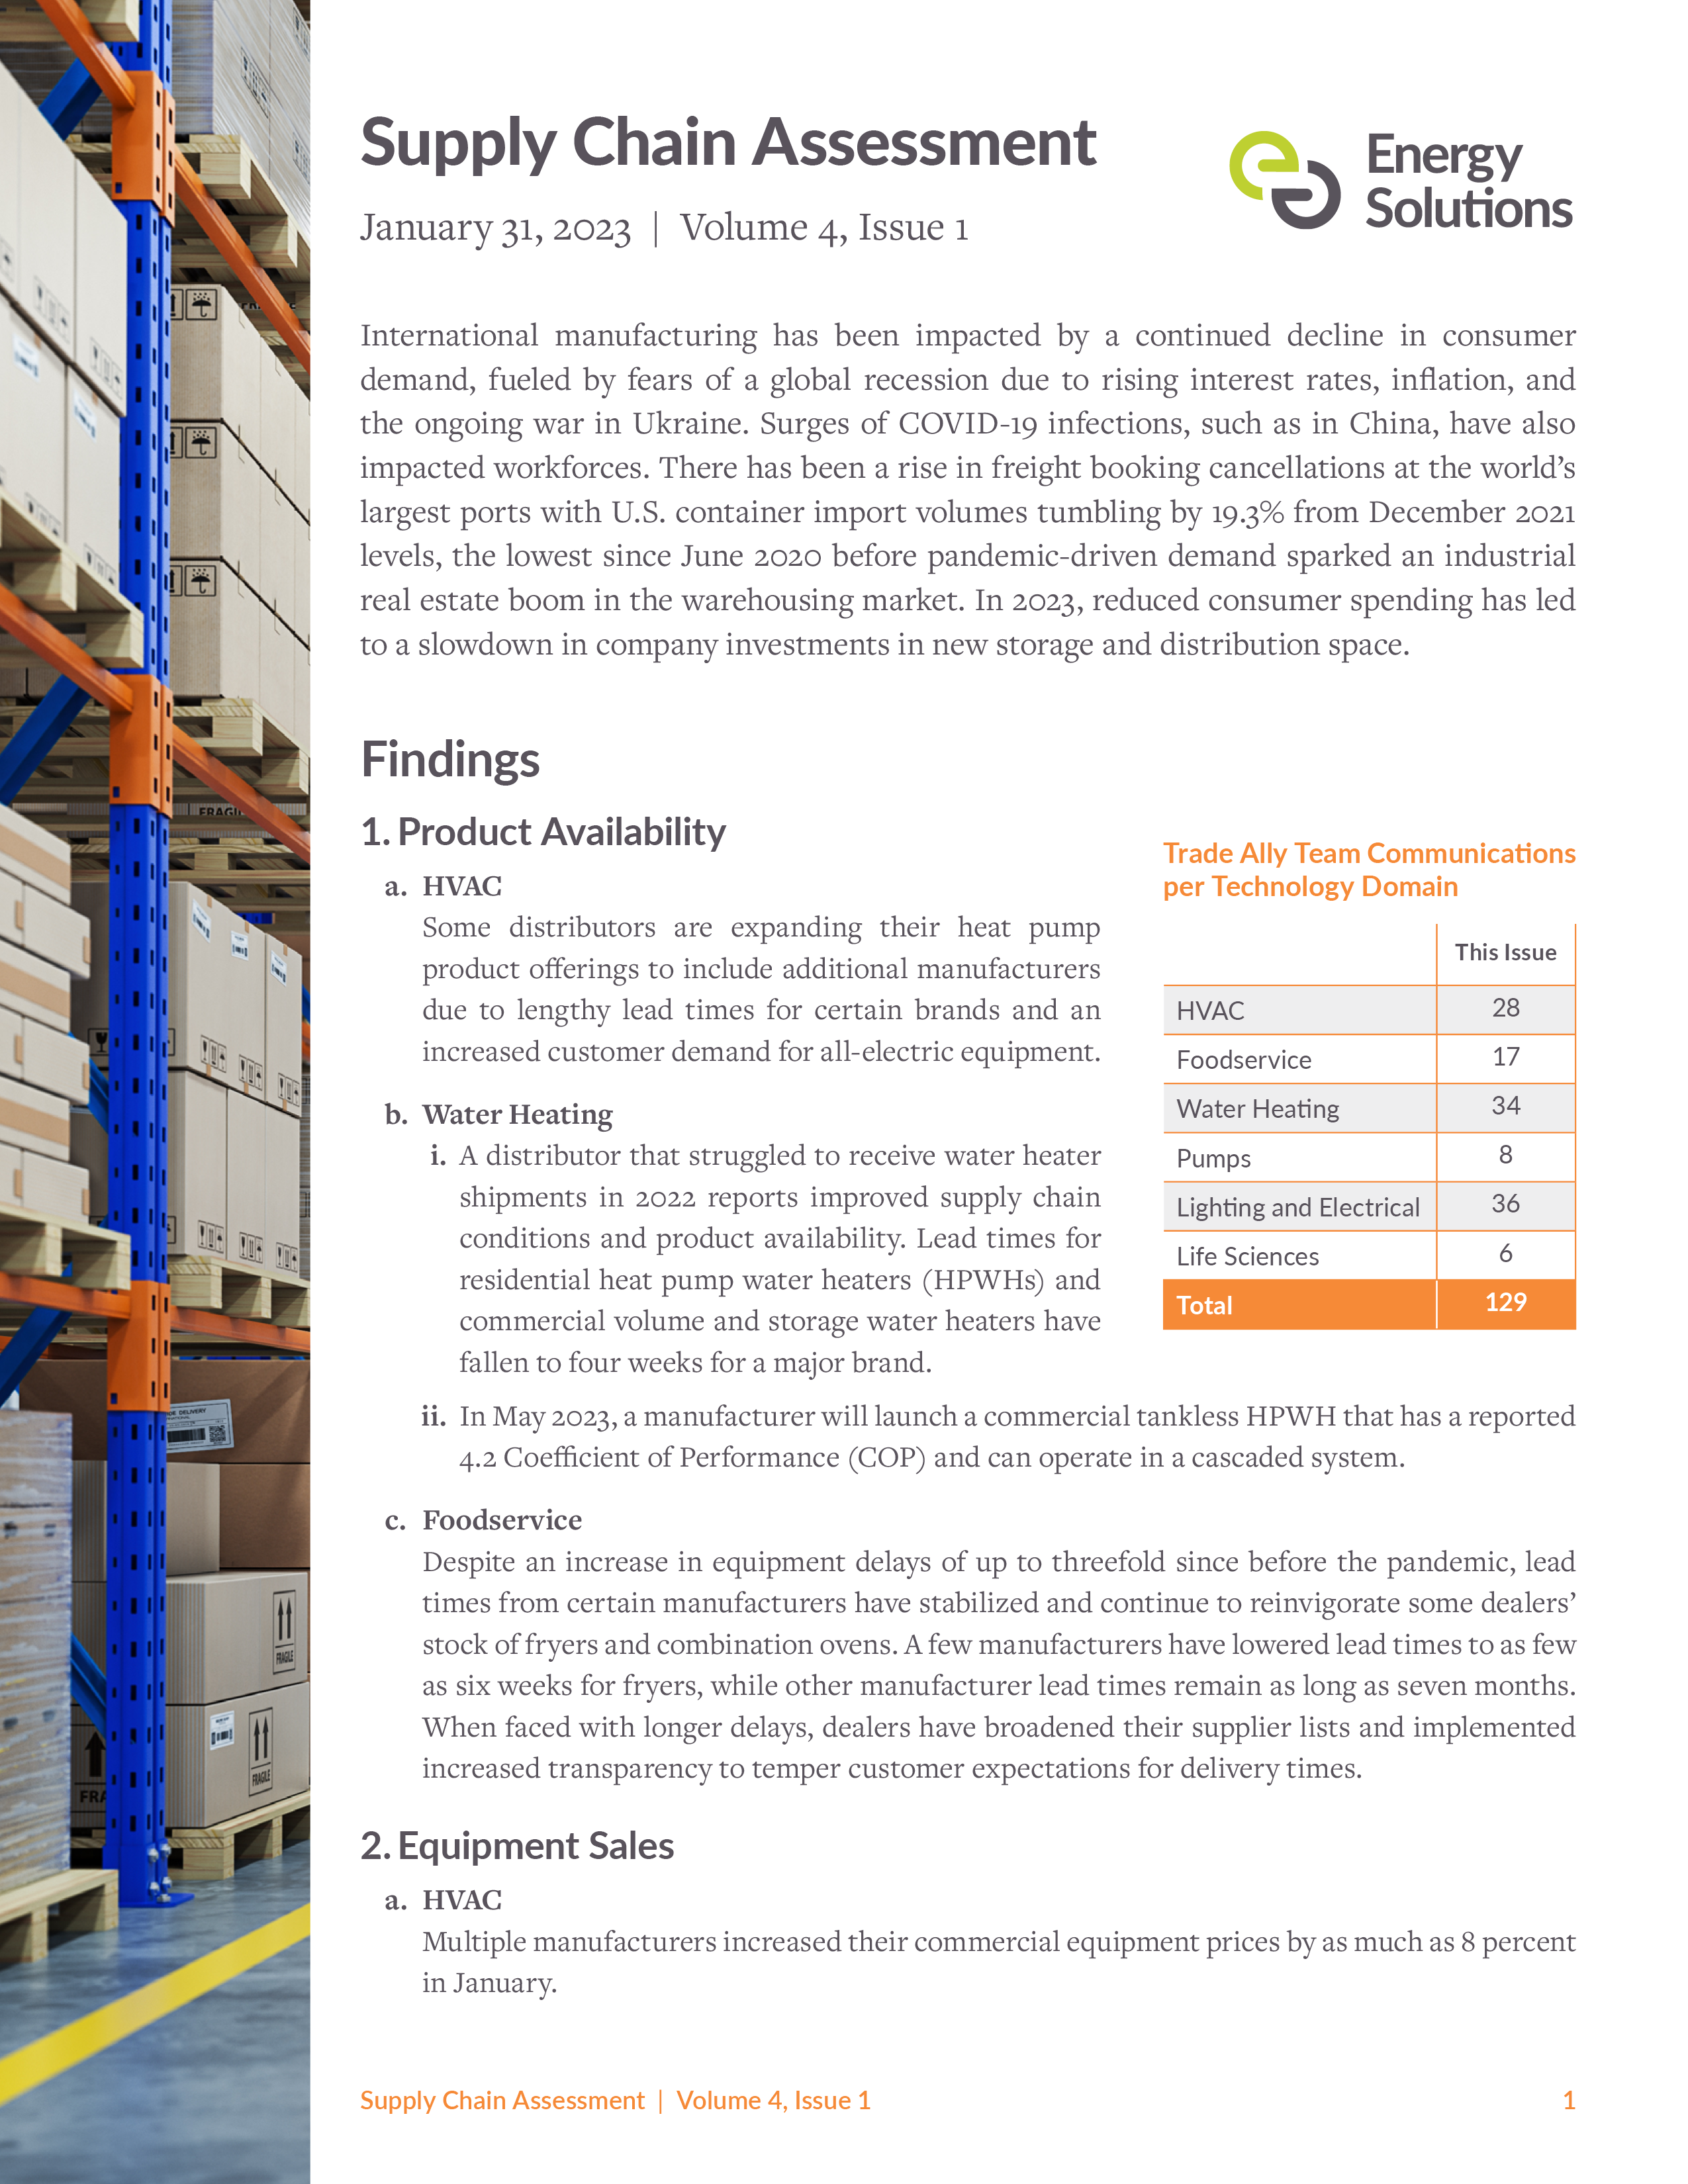 Supply Chain Assessment Volume 4 Issue 1